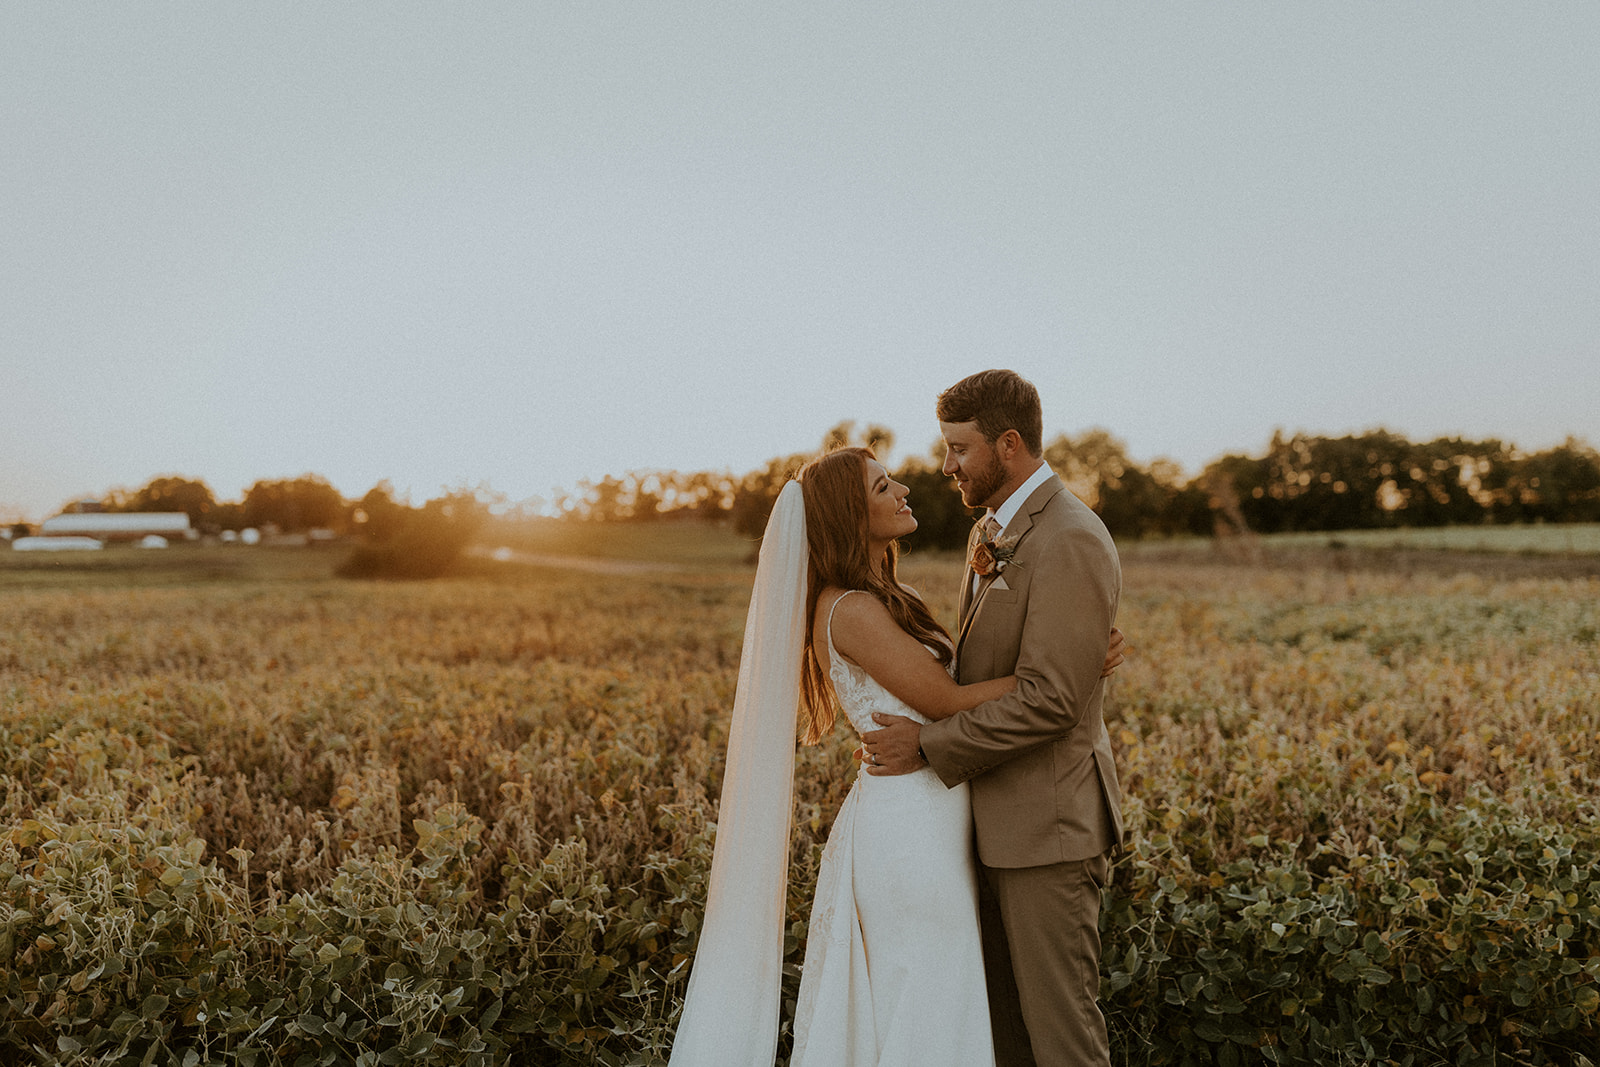 Bride and groom sharing an embrace during their autumn wedding shoot in Nebraska, captured by McKenna Christine Photography